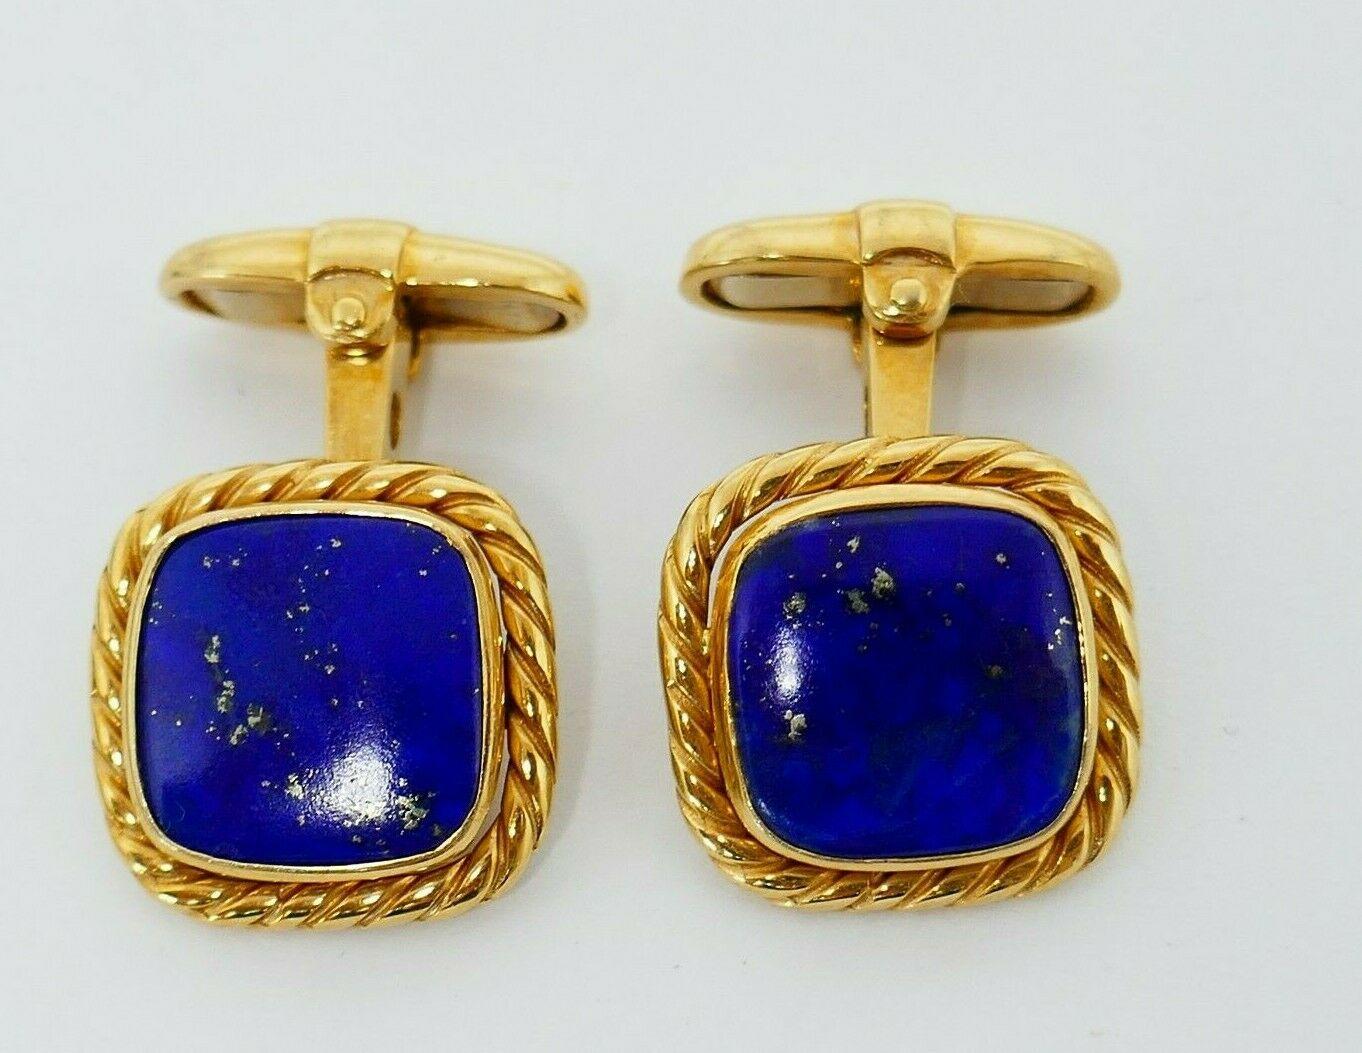 Gorgeous vintage (C.1970) square cufflinks made of 18k yellow gold and lapis lazuli. Excellent workmanship and great quality stones.
Stamped with an Italian maker's mark (328 AR) and a hallmark for 18k gold. 
Measurements: the square part is 3/4